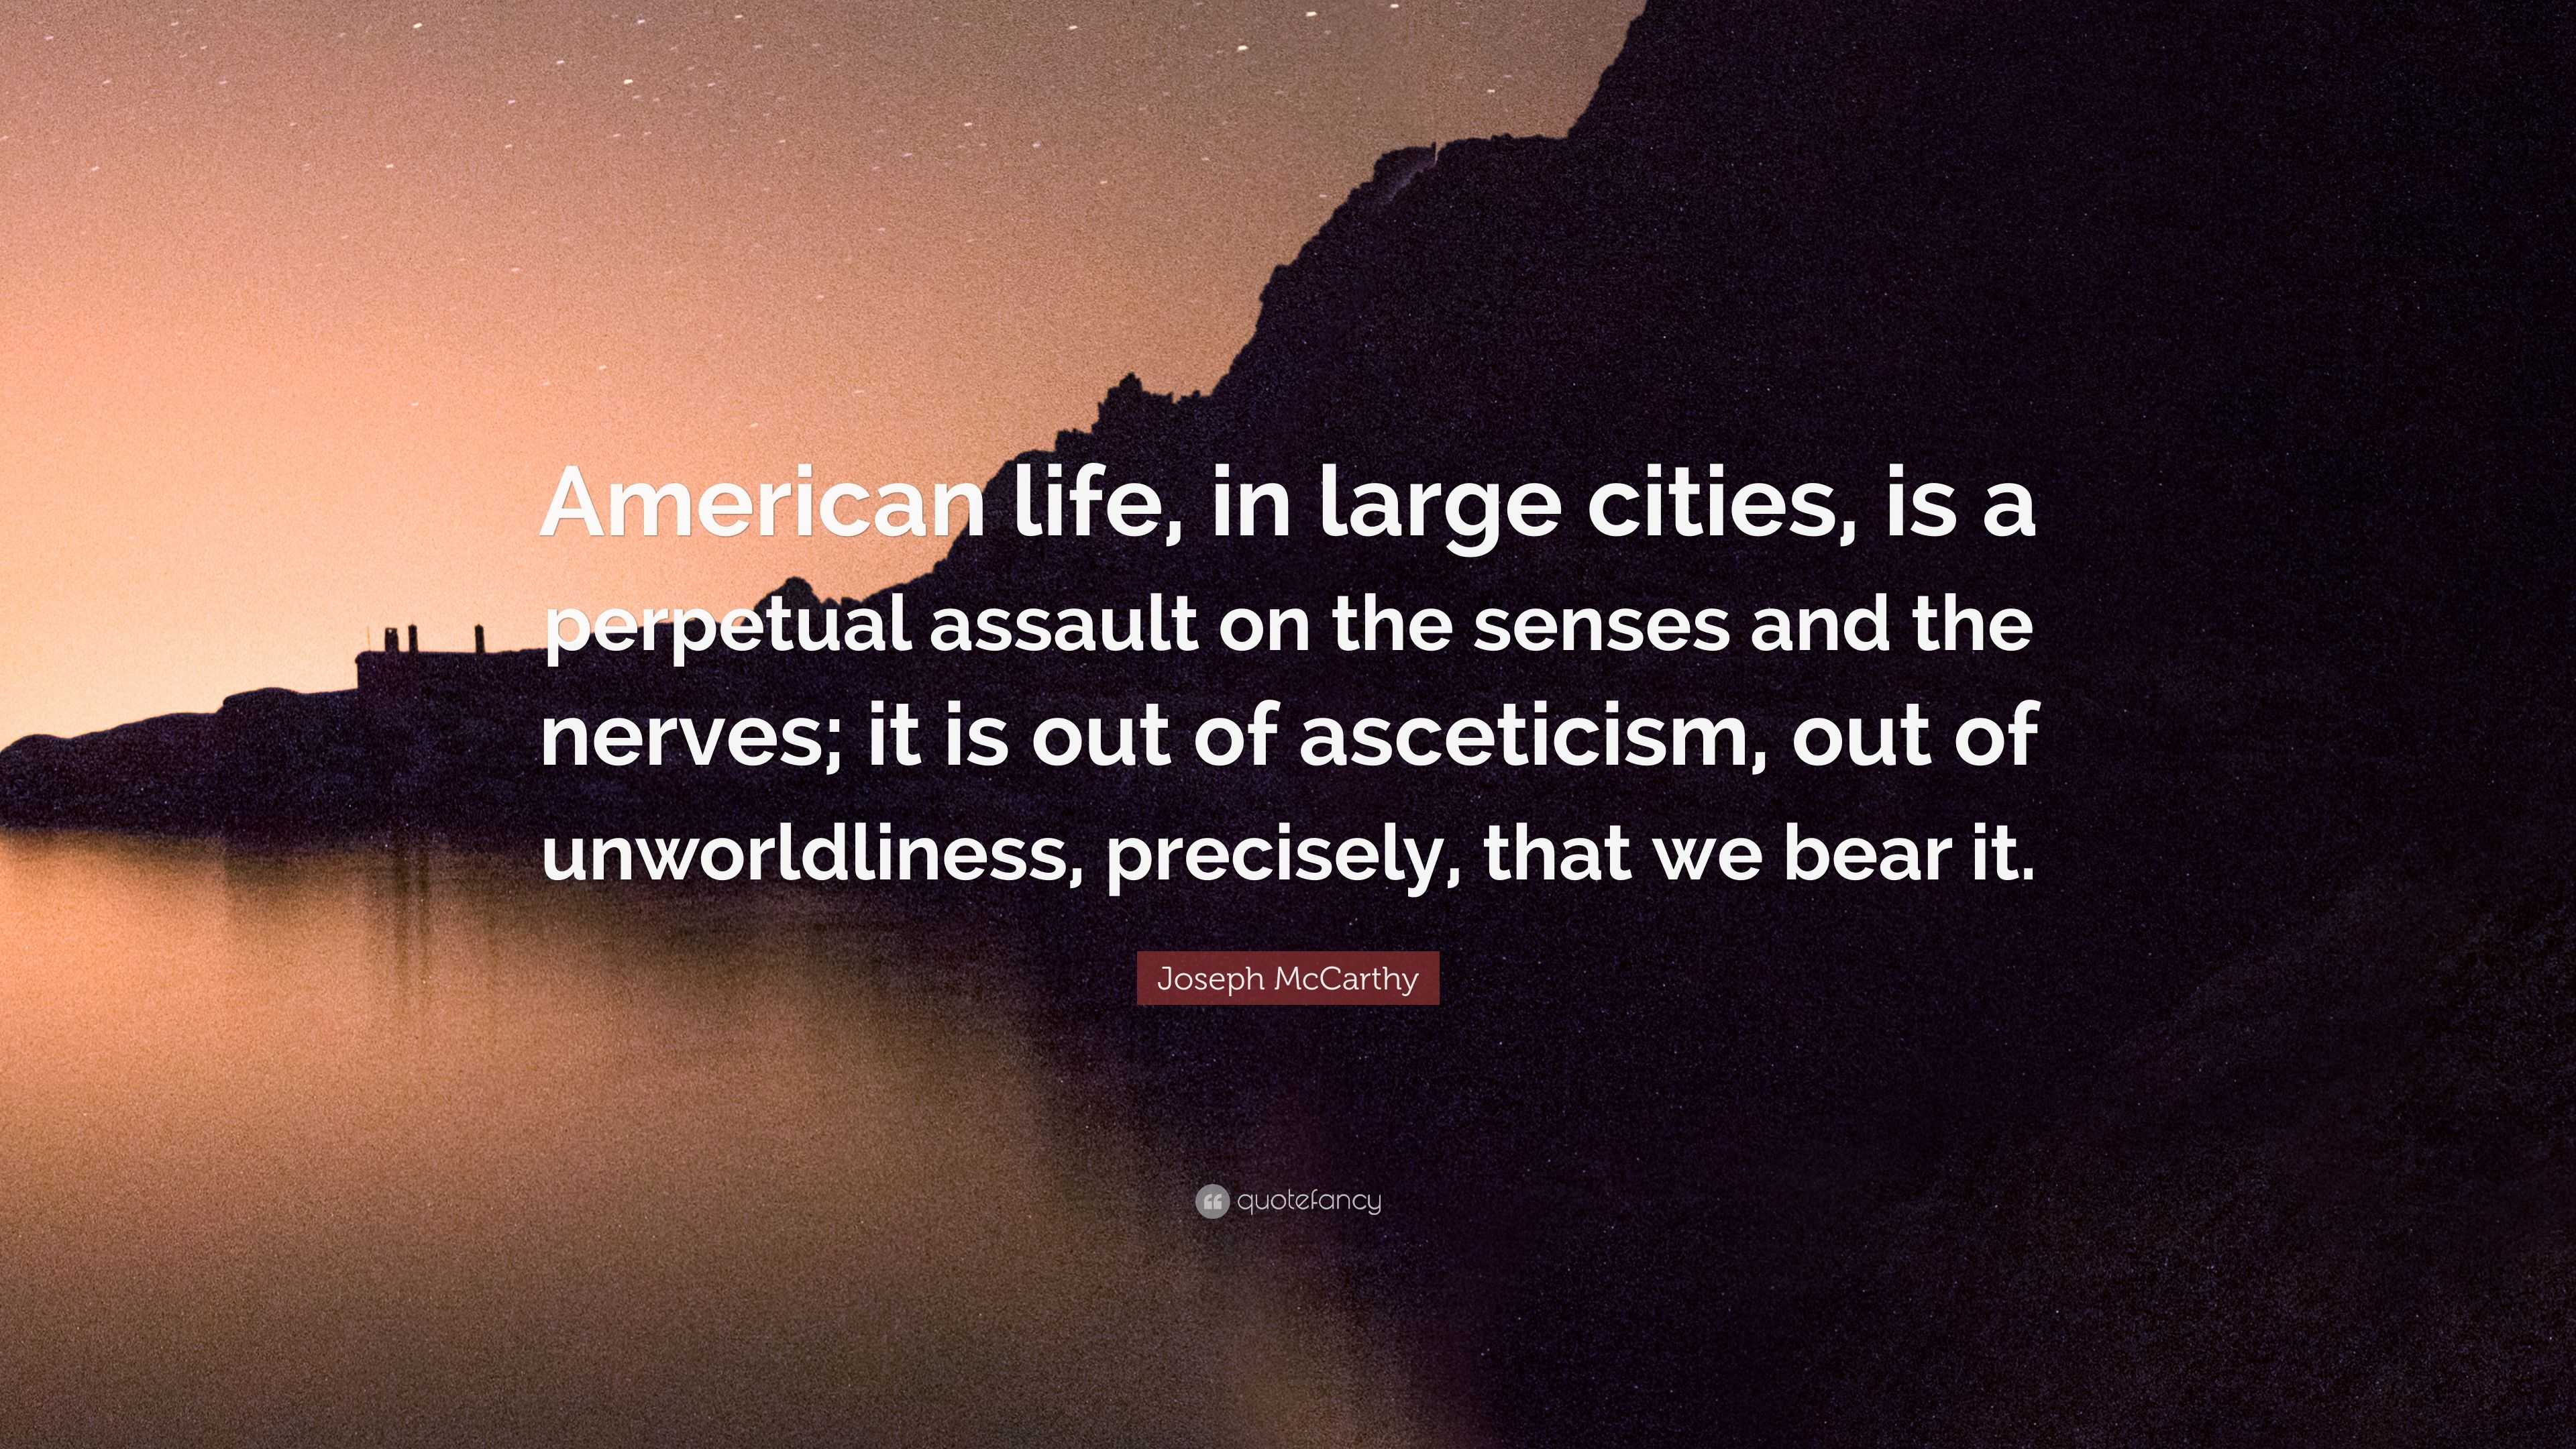 Joseph McCarthy Quote: “American life, in large cities, is a perpetual ...